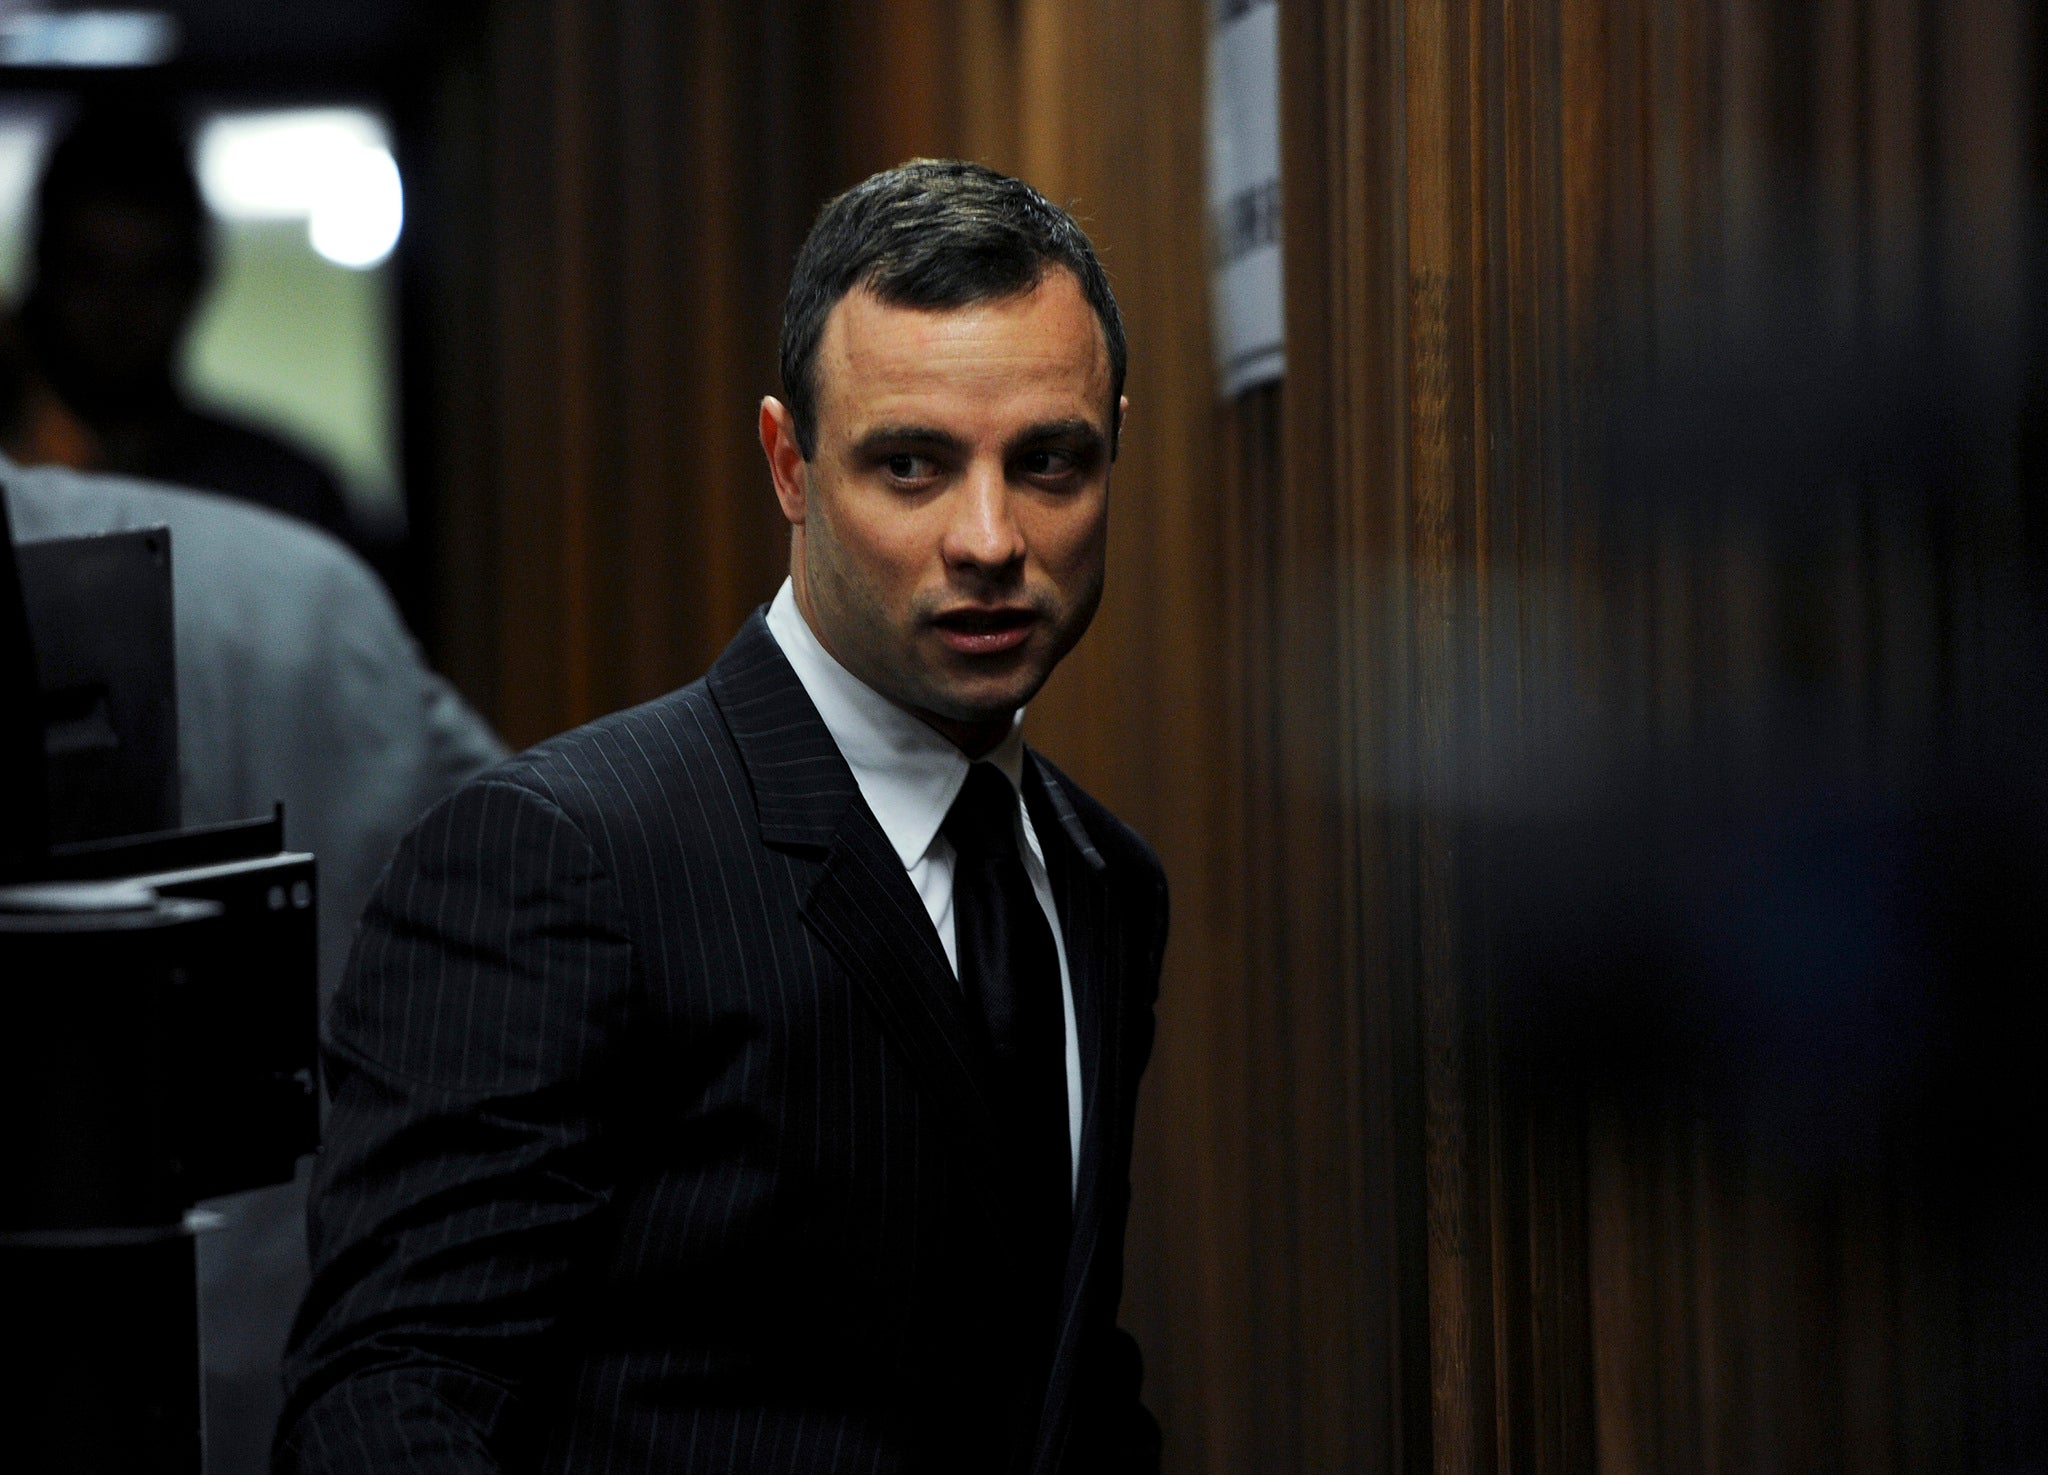 Pistorius' lawyer says the broadcasting of the leaked footage was 'illegal'